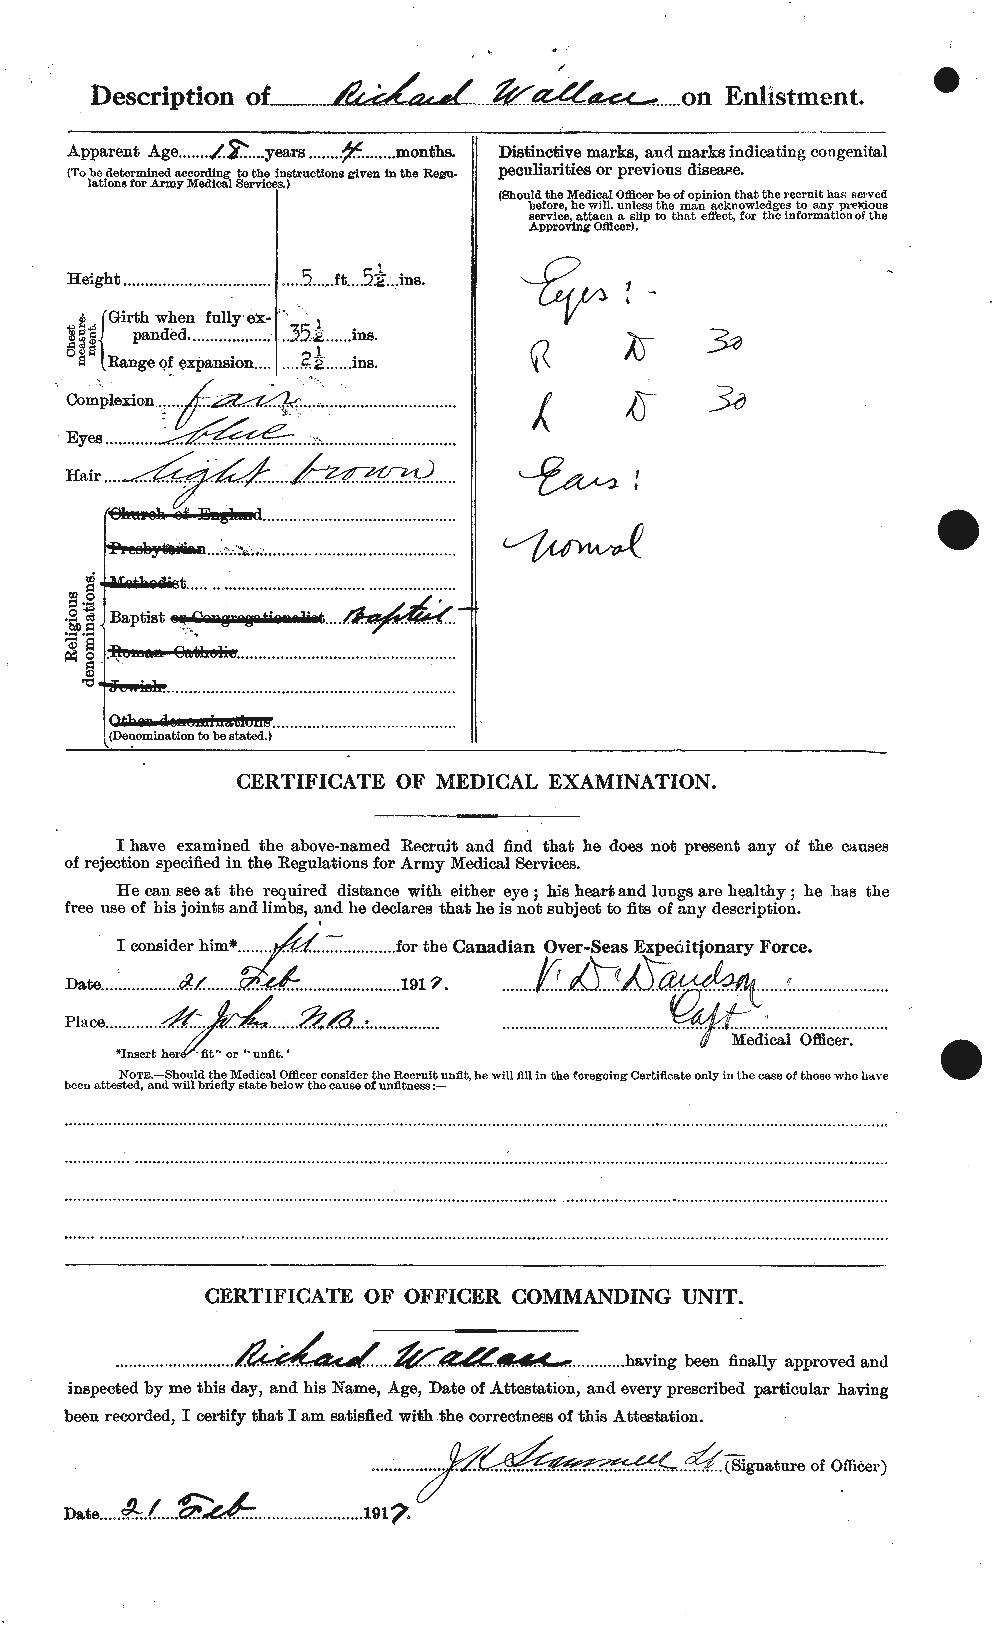 Personnel Records of the First World War - CEF 654701b